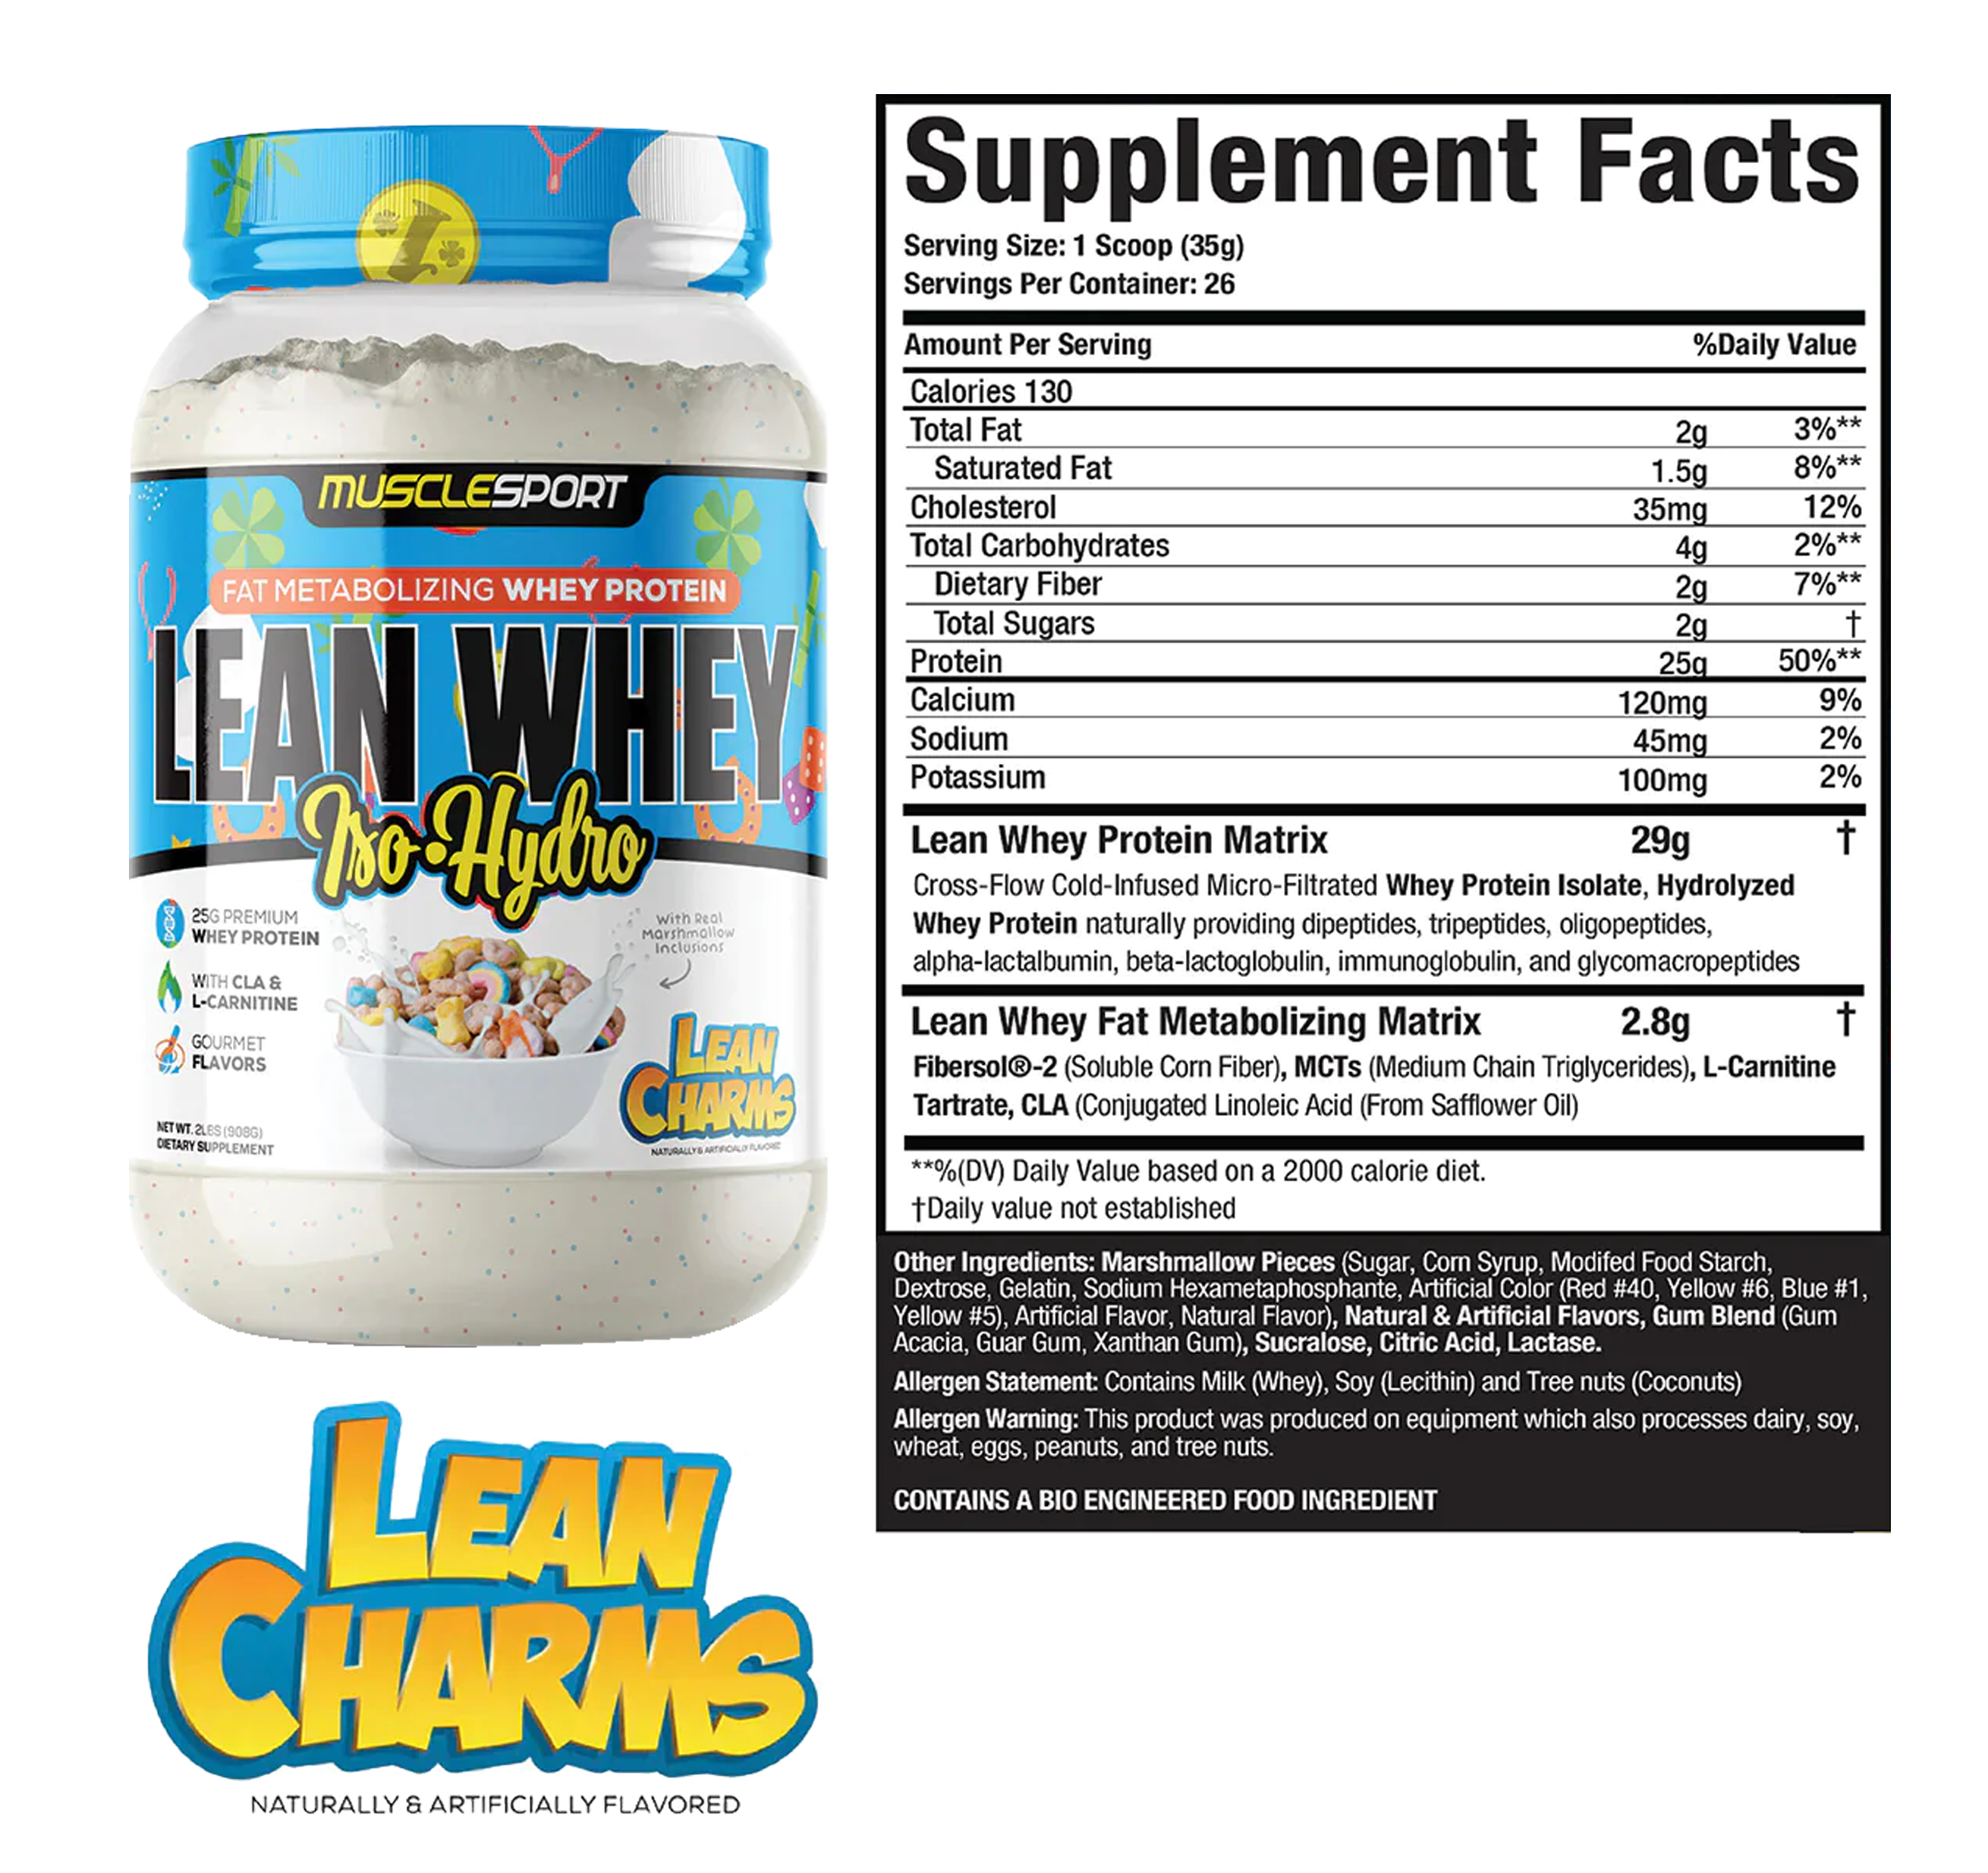 MUSCLESPORT LEAN WHEY 2LBS